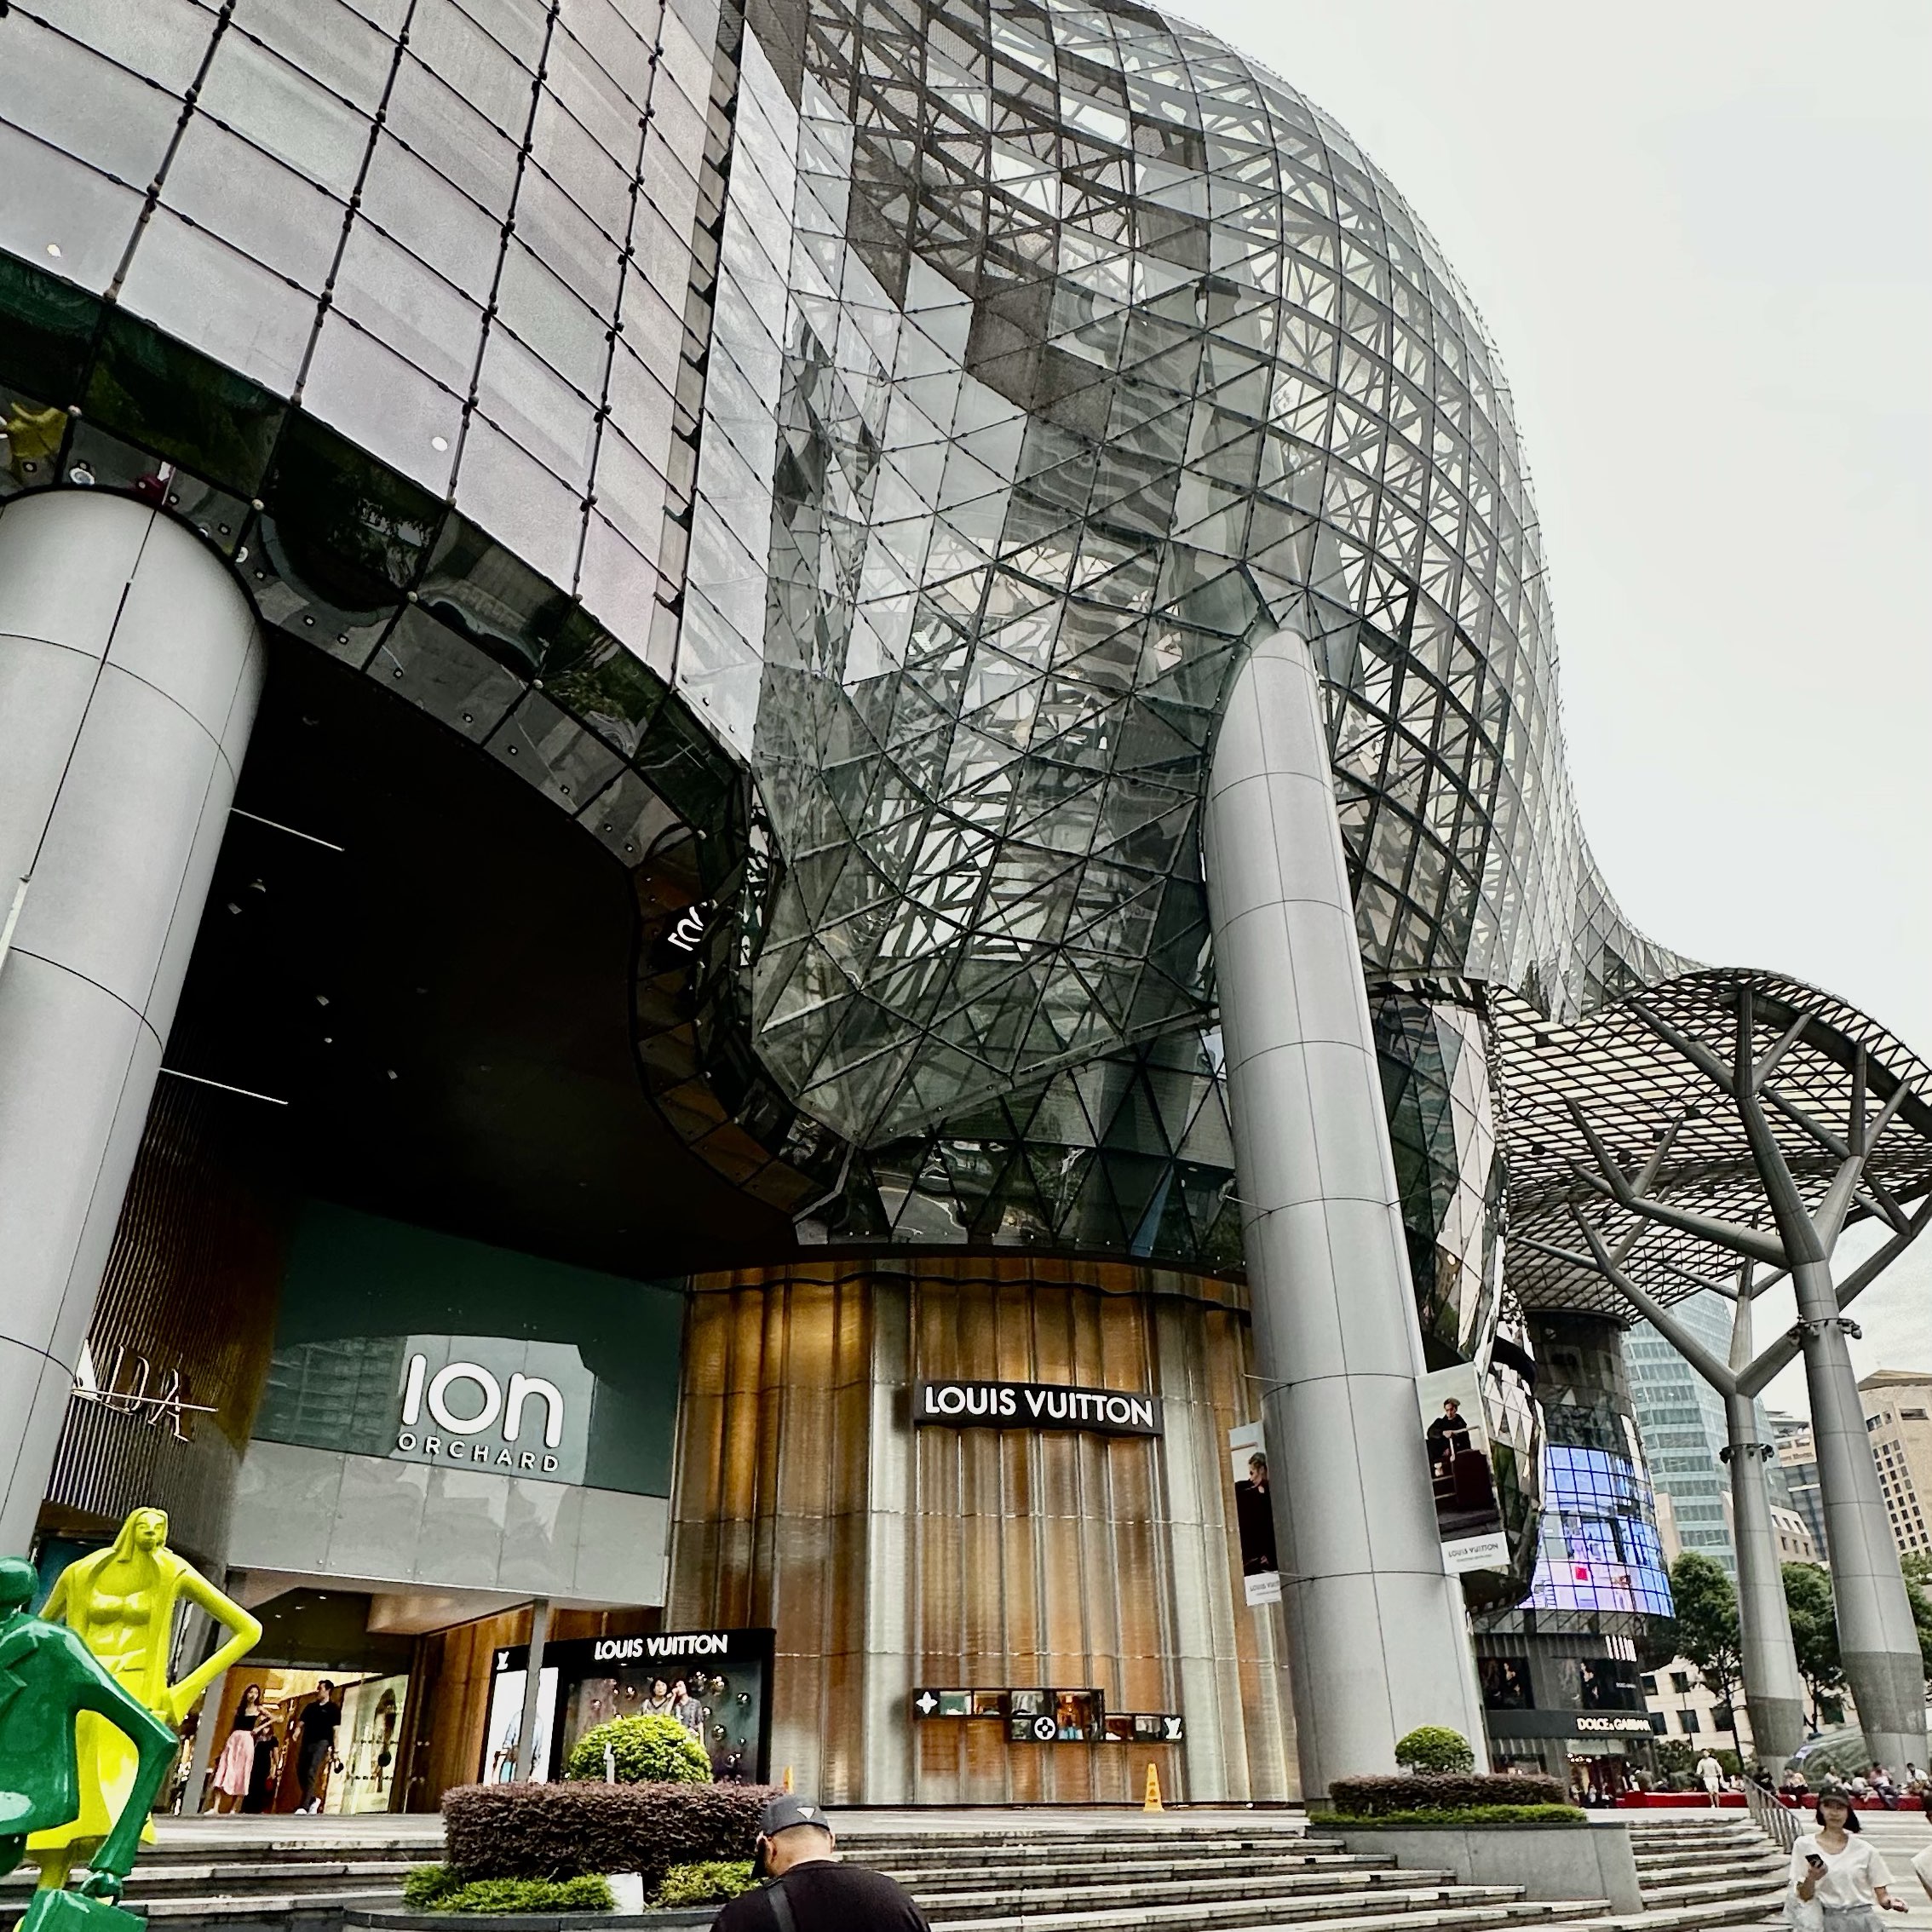 ION Orchard - Visit the new Calvin Klein store at ION